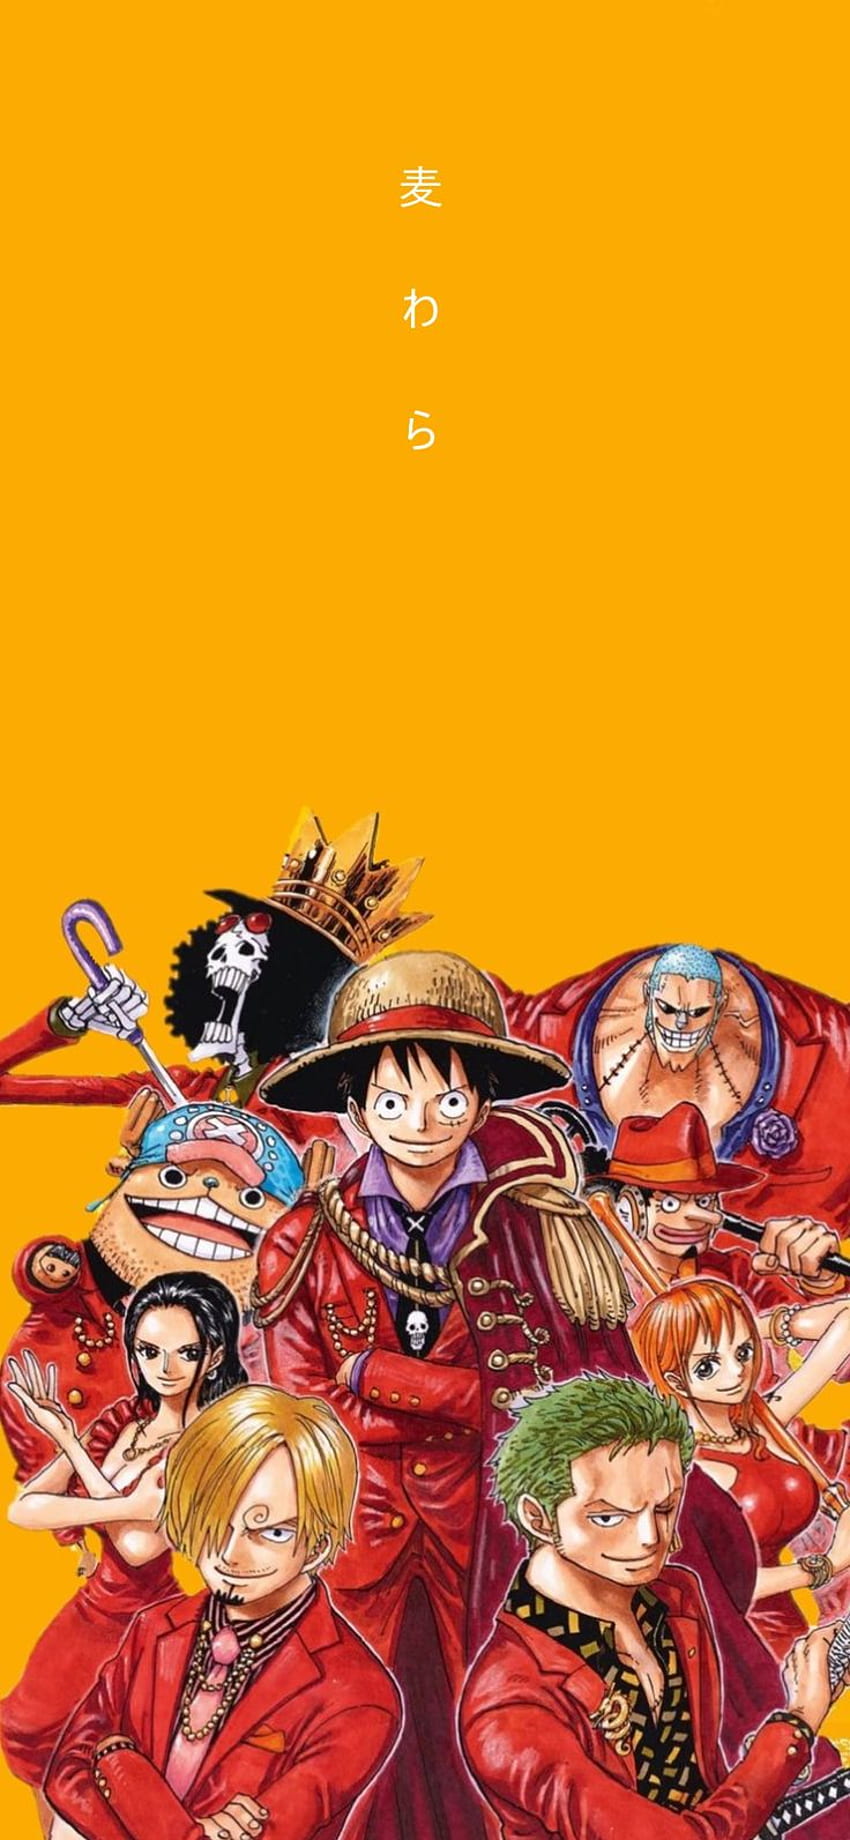 Where Does One Piece Anime End in MangaJapan Geeks